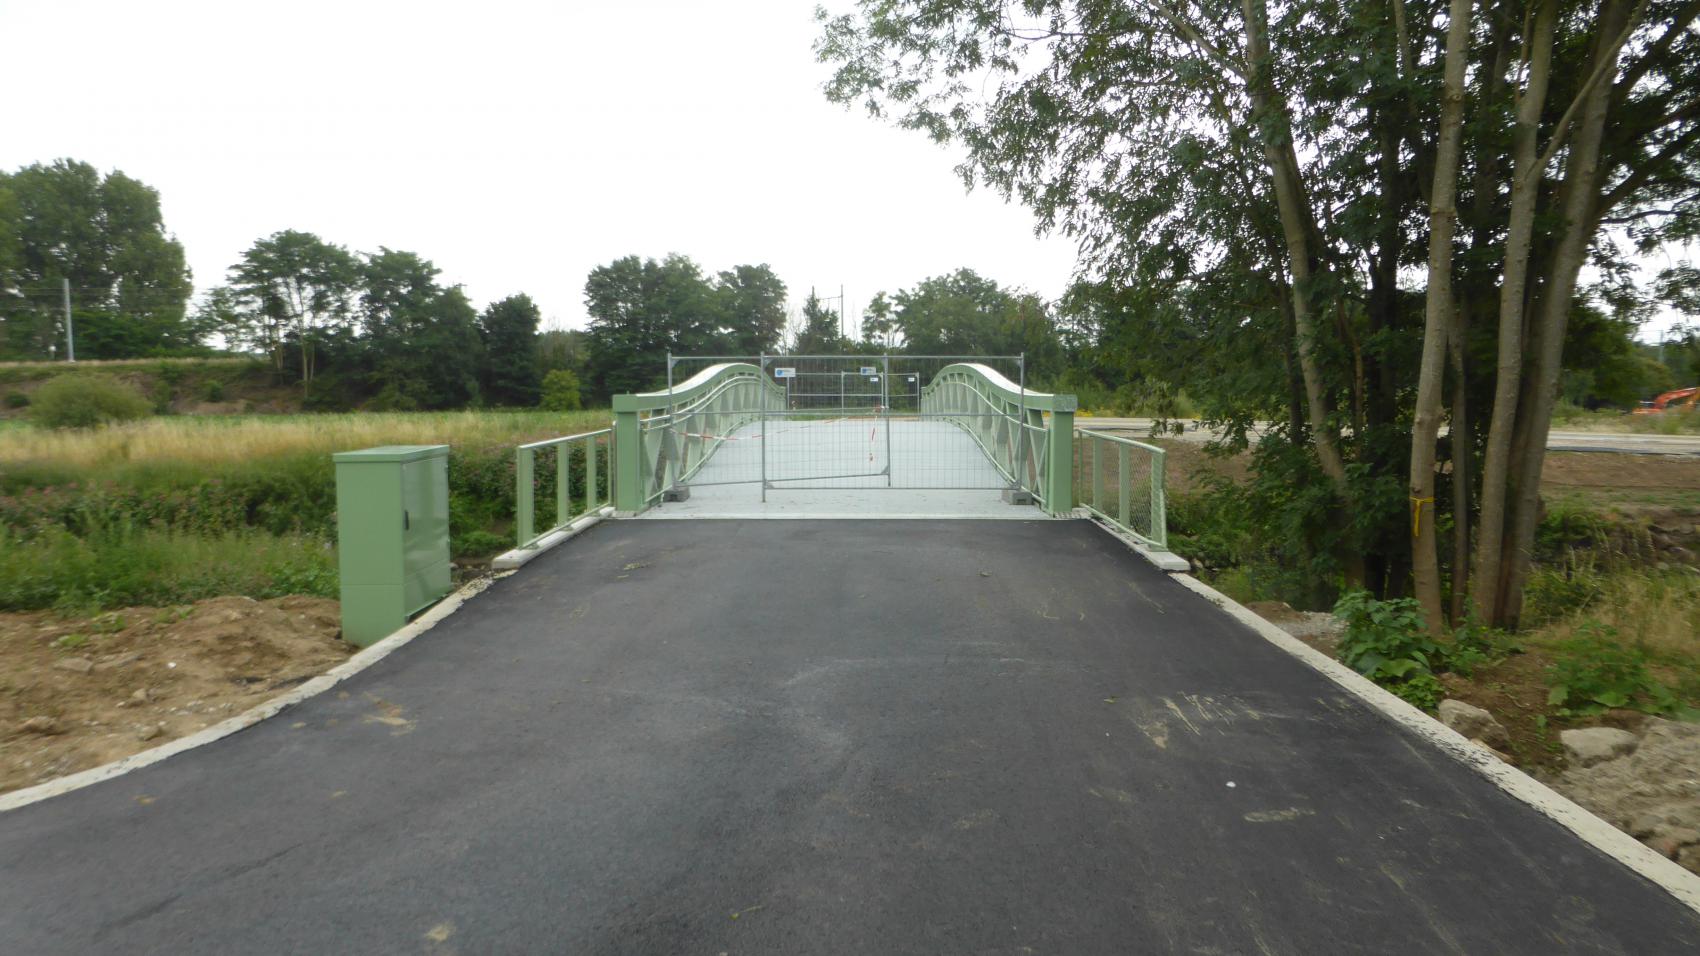 New cycling bridge over Zenne in Eppegem. The bridge is 5 m wide to provide 4 m of safe riding width and 0.5 m of shoulder on each side.